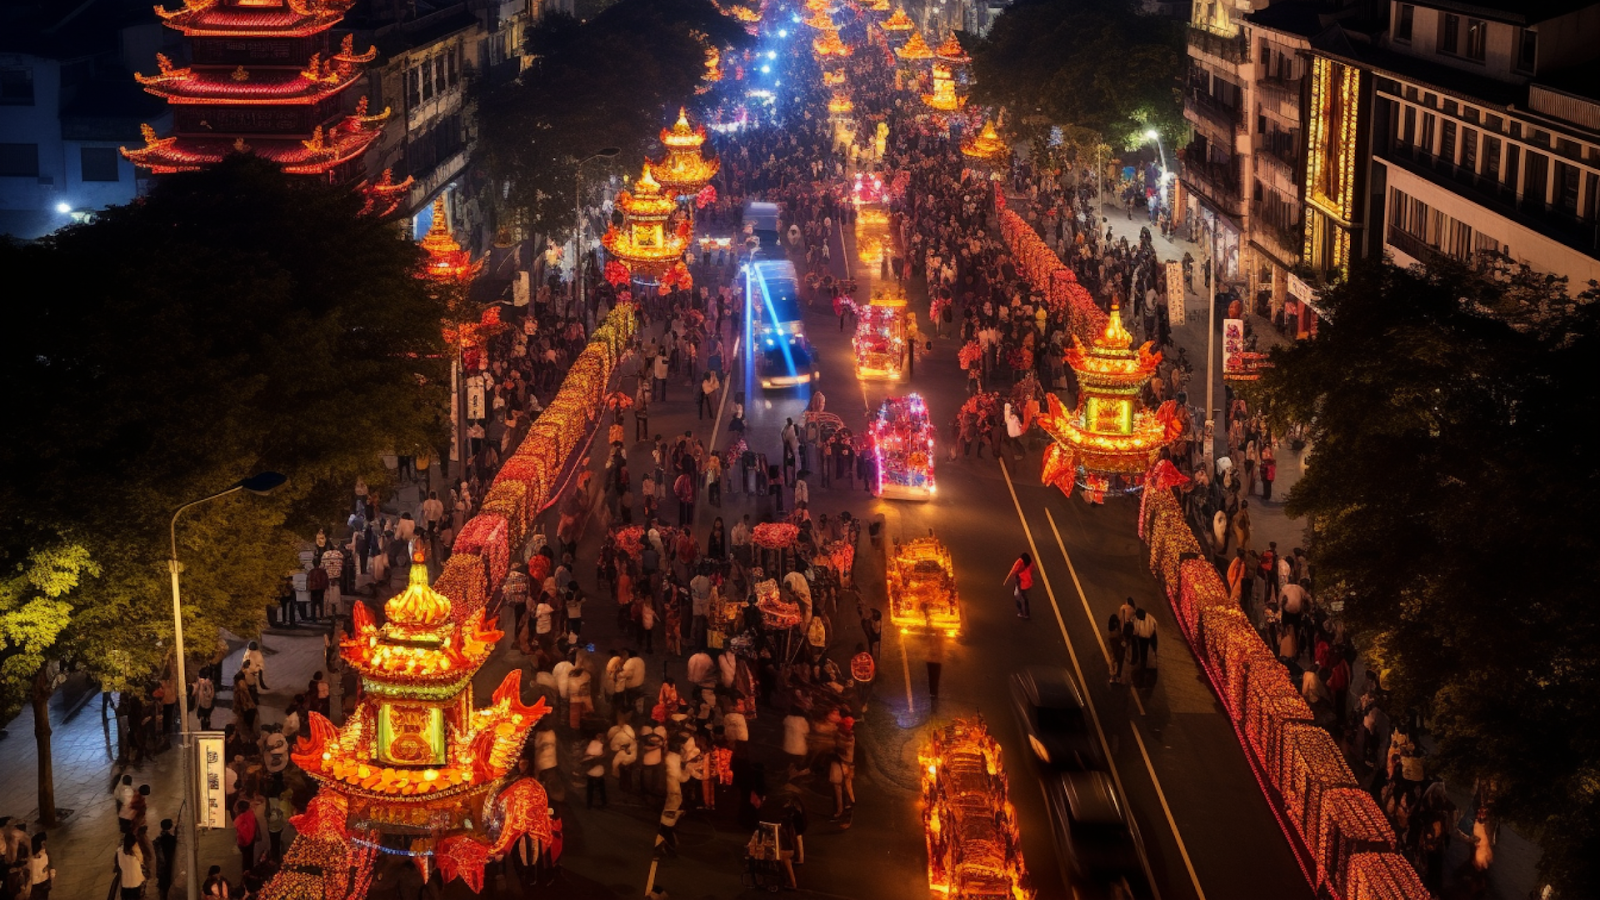 An aerial view of a vibrant lantern festival procession winding through the streets of a city, showcasing a traditional celebration.